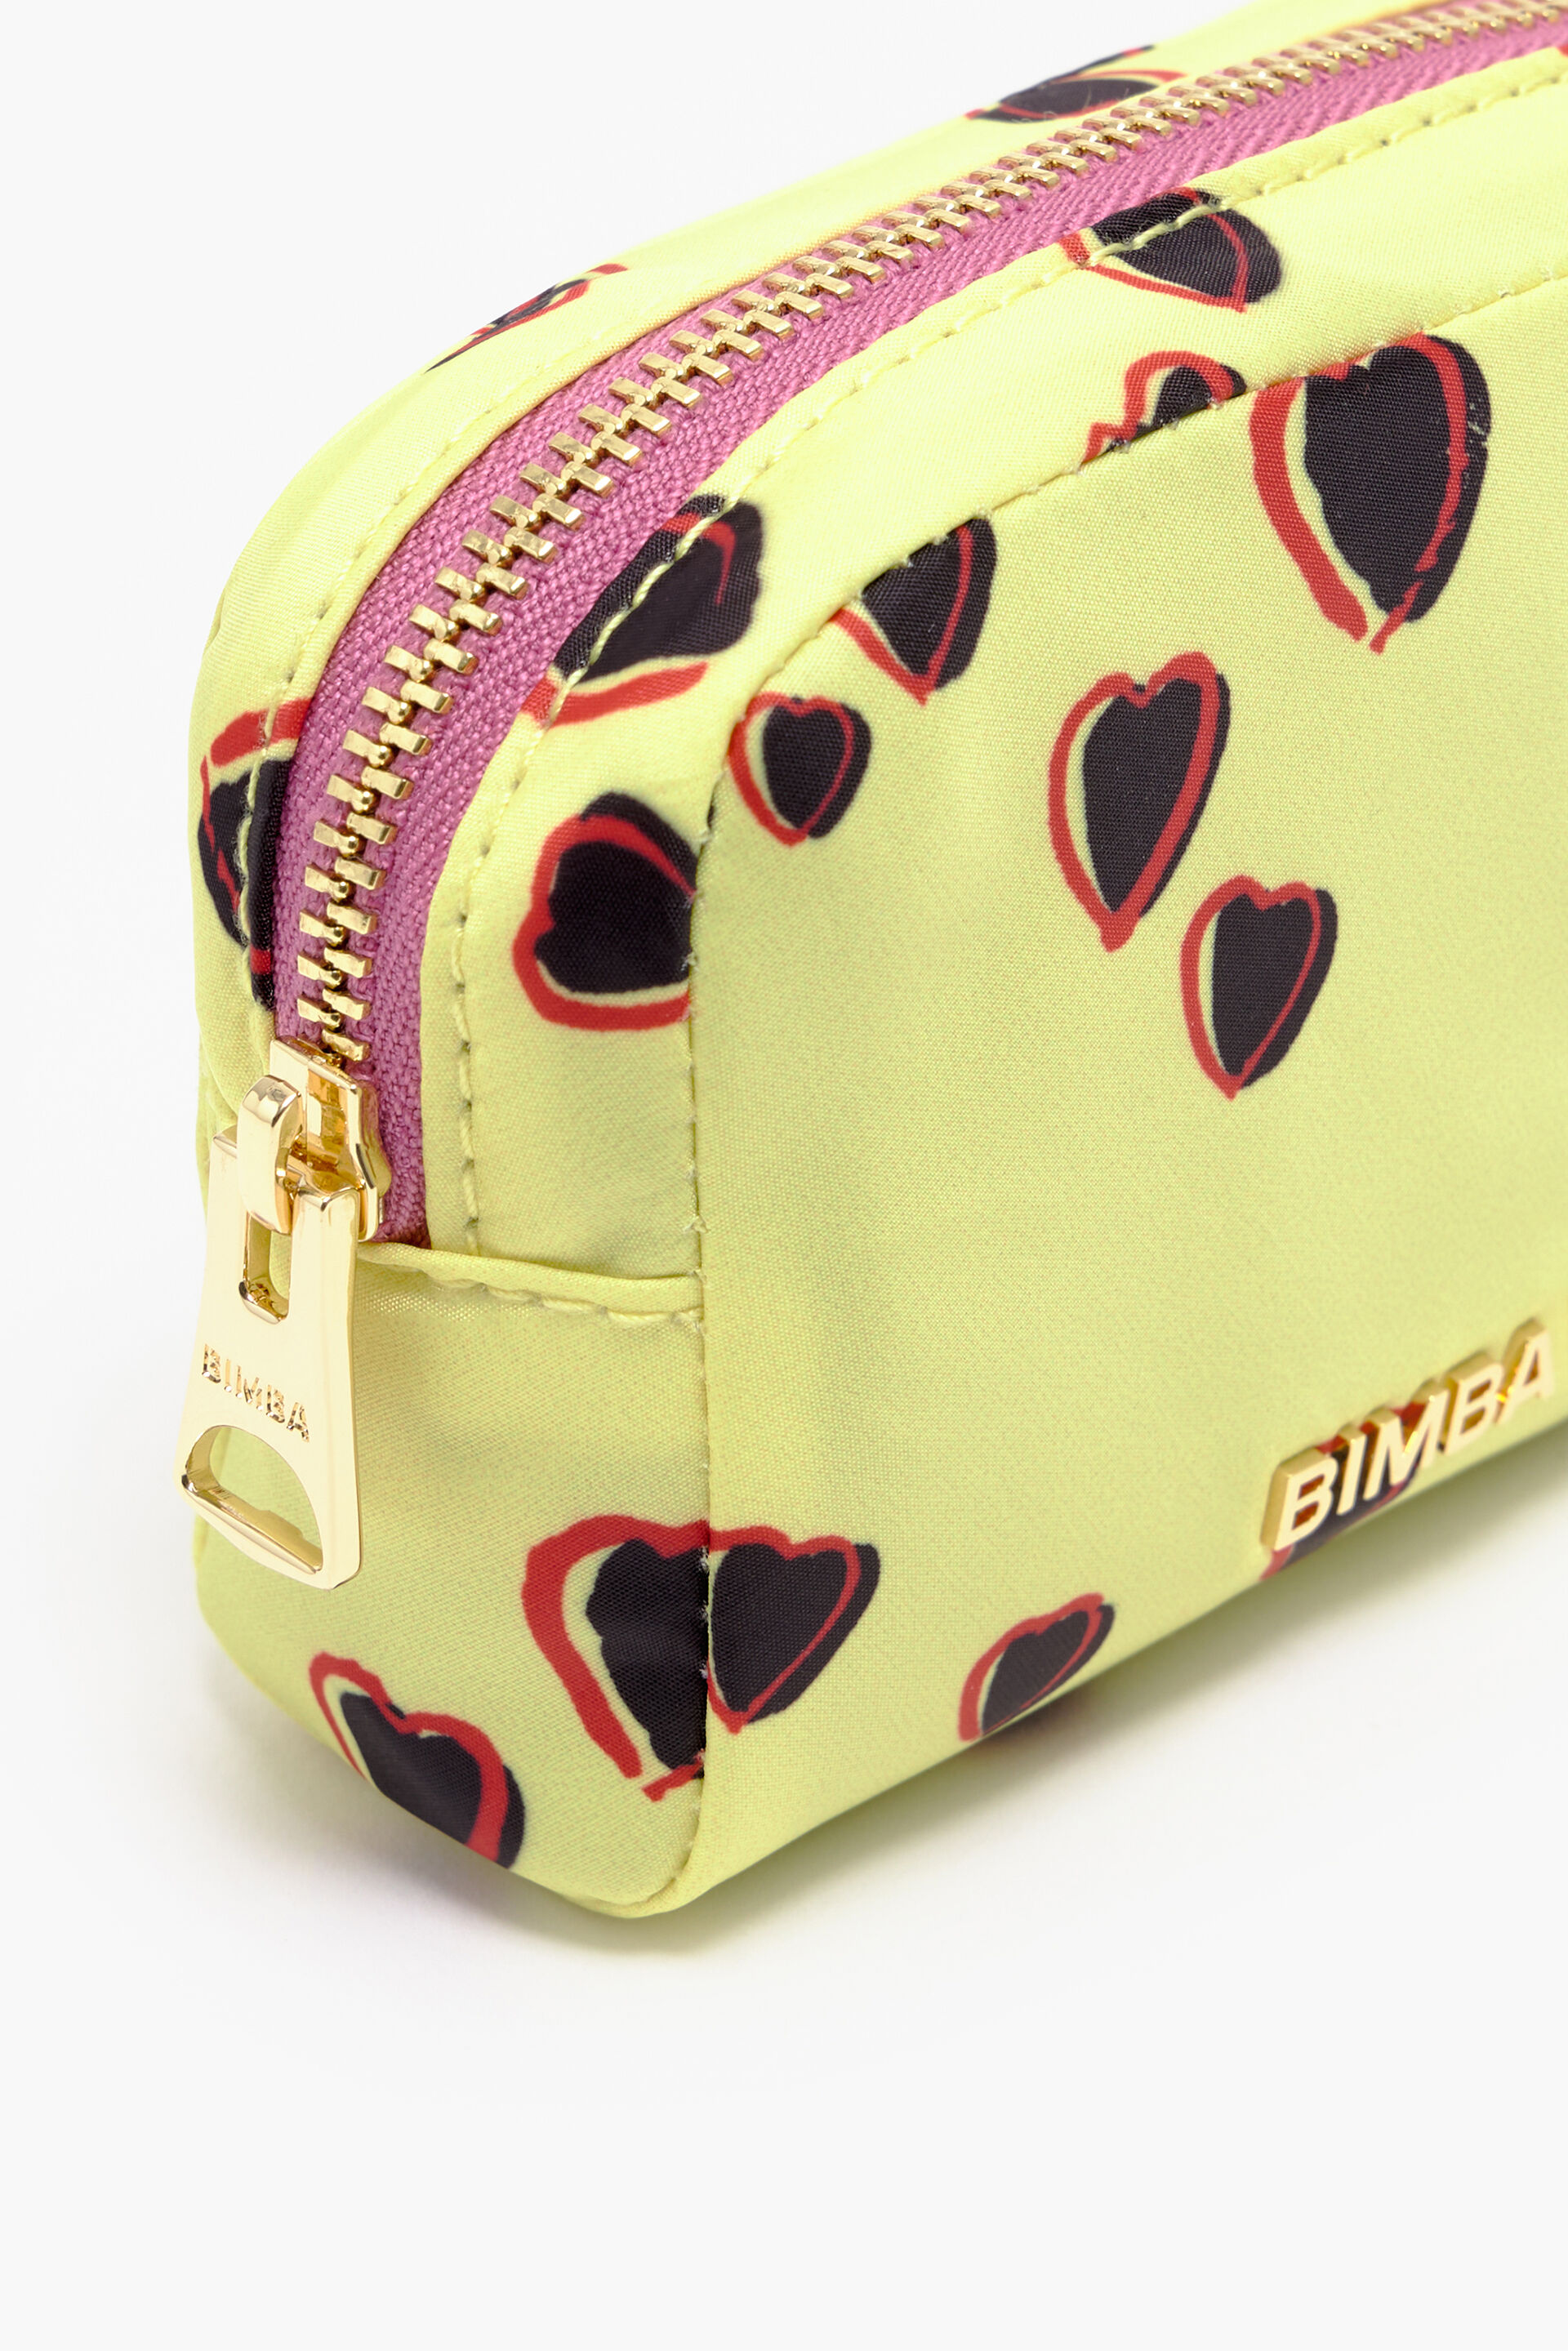 Small rectangular yellow make-up case with Hearts print